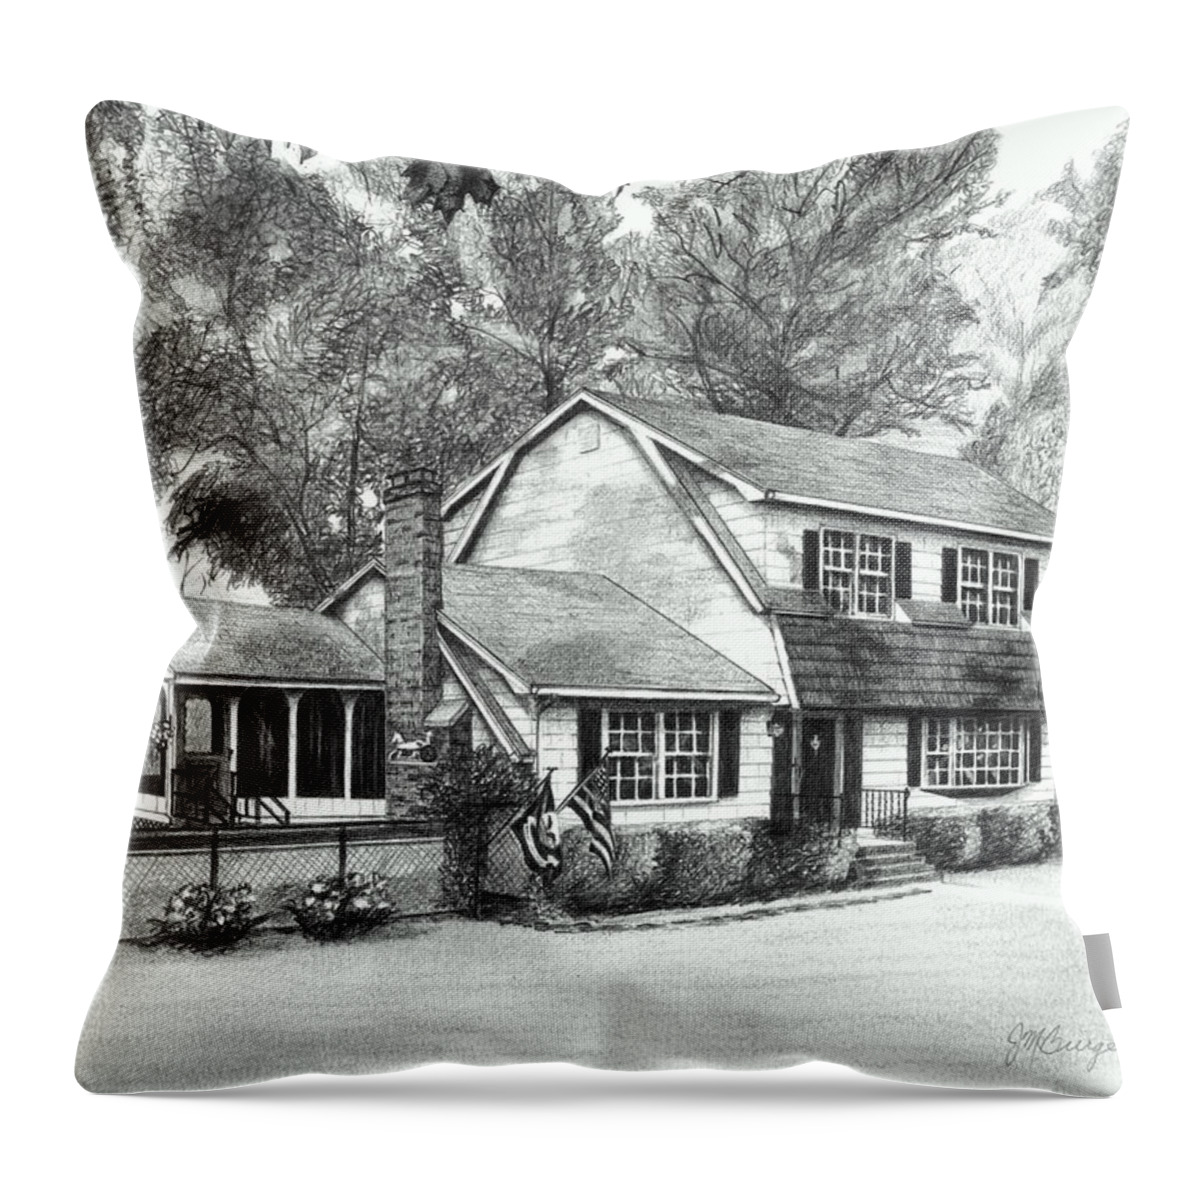 House Throw Pillow featuring the painting Knollwood by Joseph Burger